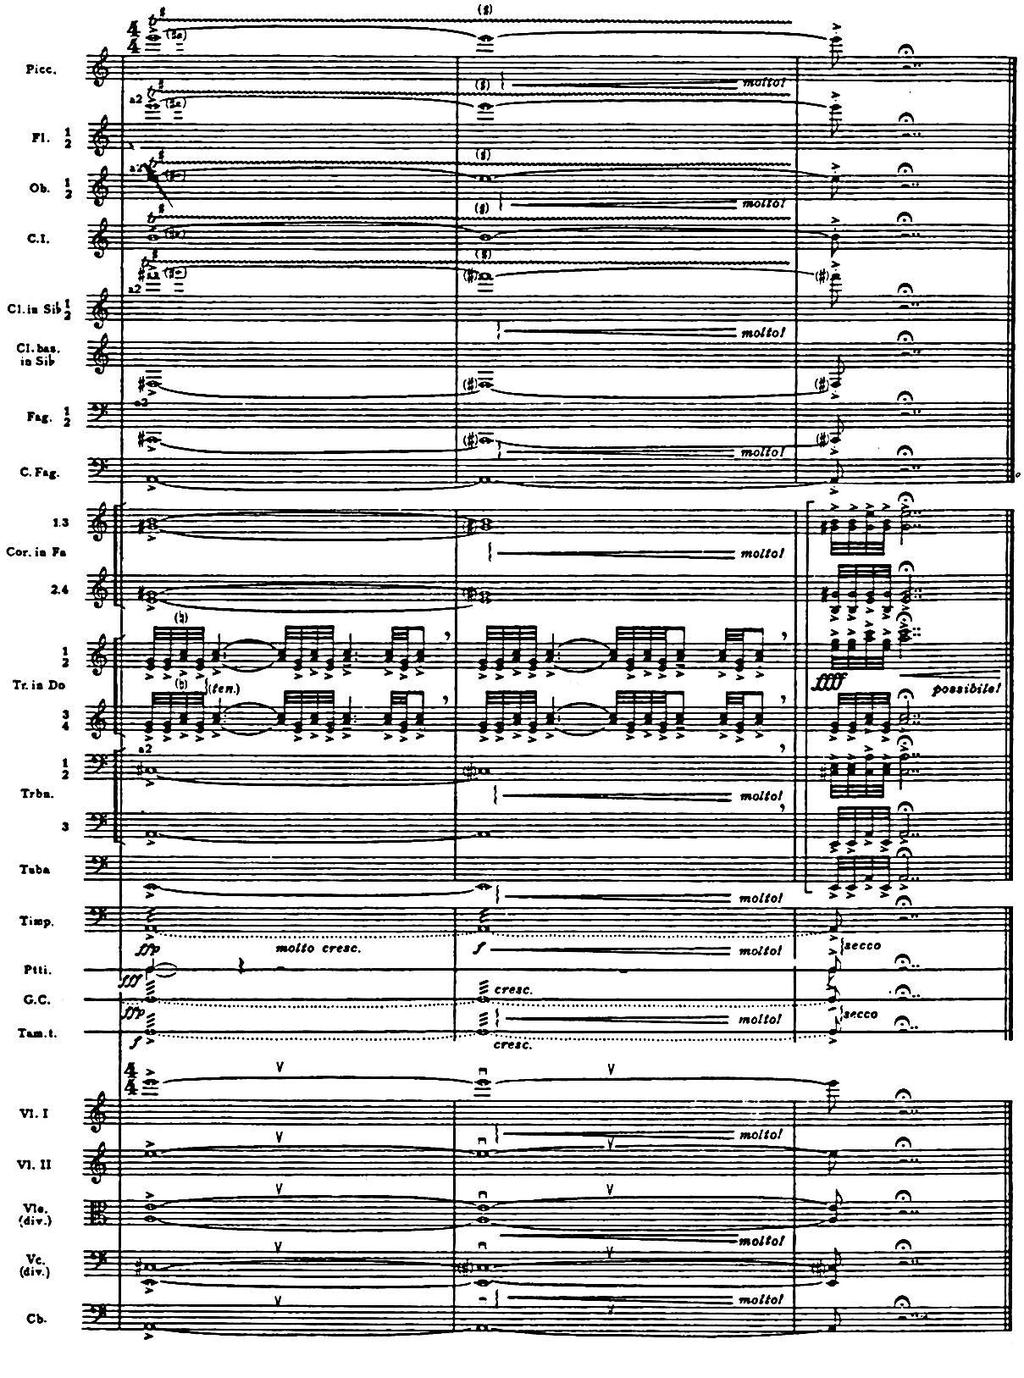 Figure 42: Sinfonia Sacra, Hymn (Major-minor Chord) An example of how the major-minor chord is used in Sinfonia Sacra, coming from the final three bars of Hymn, where the trumpet motif (taken from